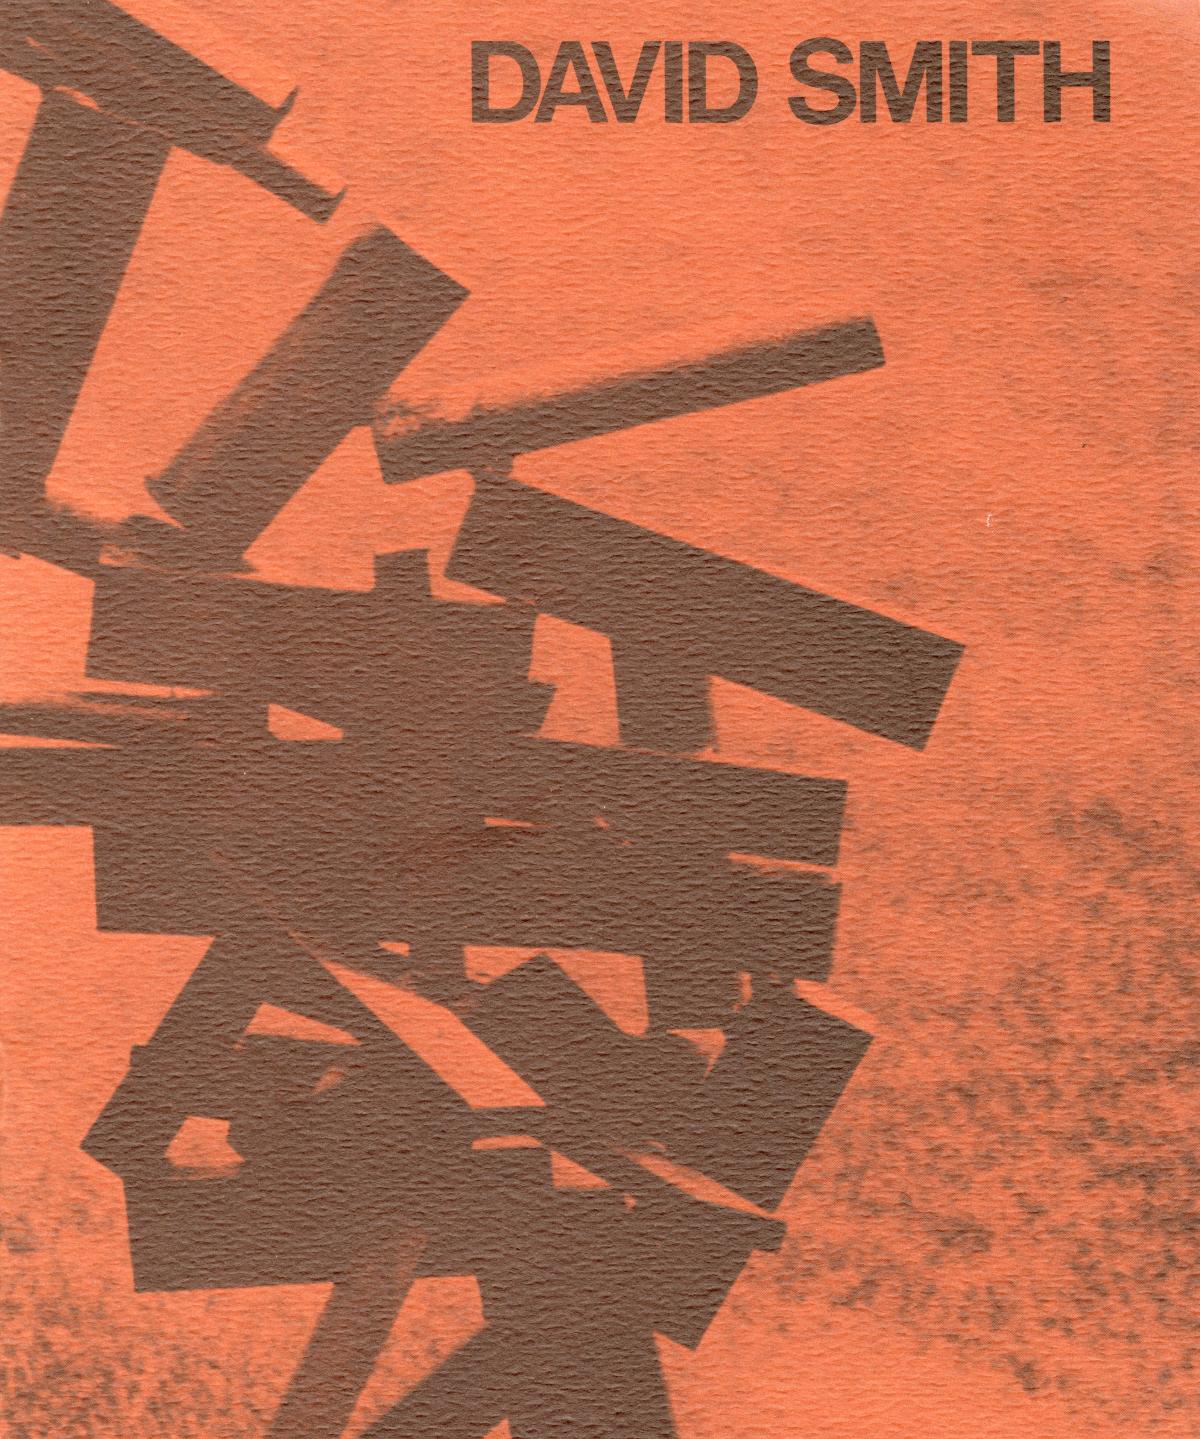 Sculpture by David Smith in the Storm King Art Center Collection, circa October 1971, catalogue cover